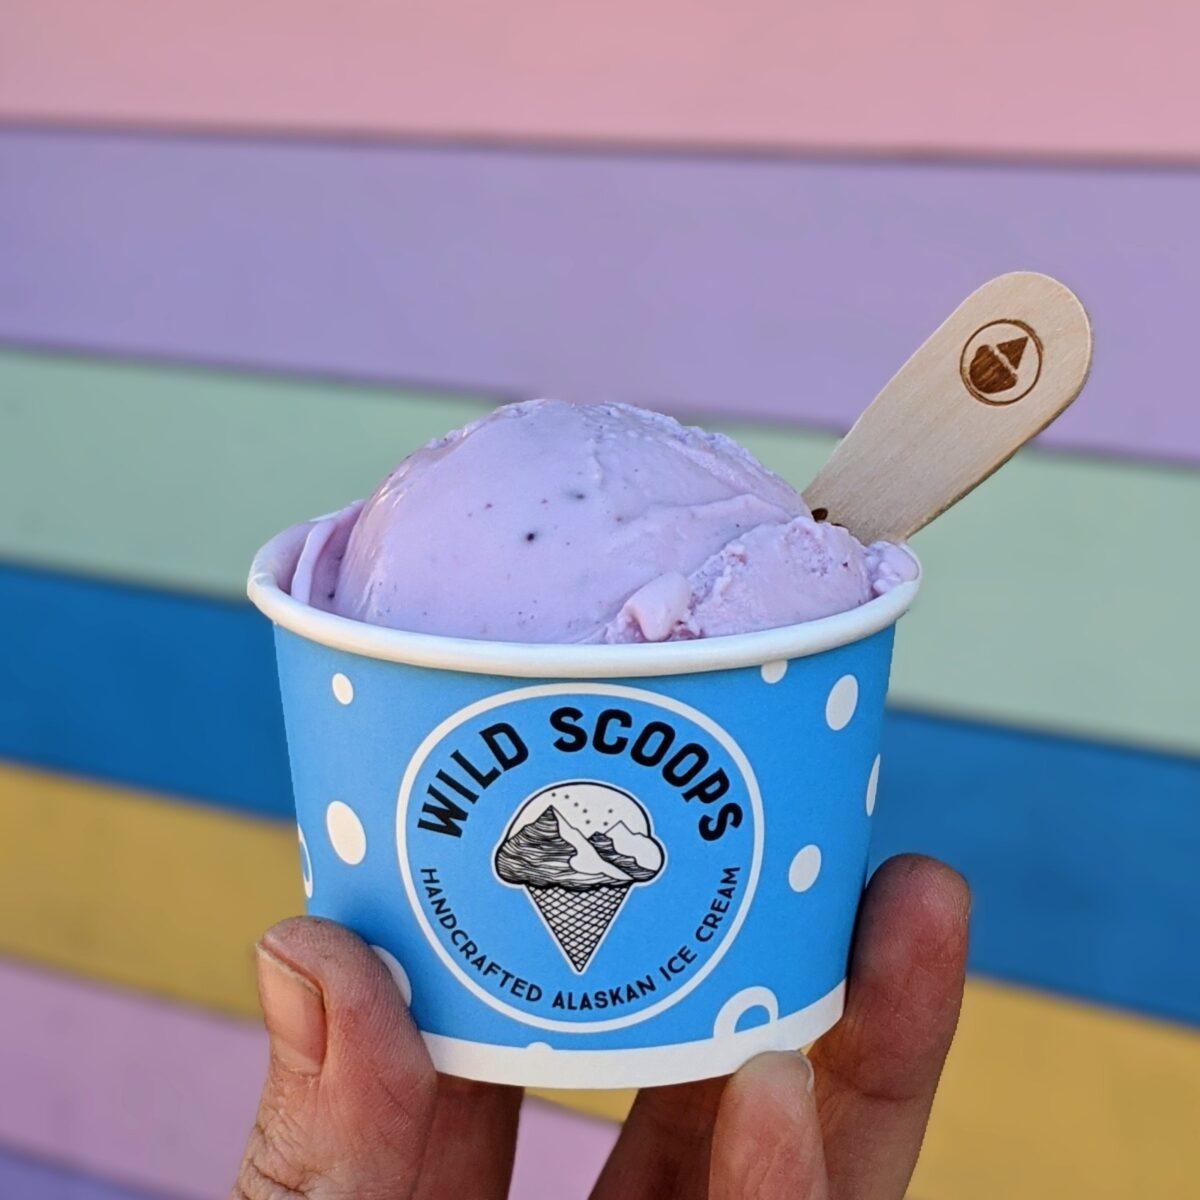 Currant ice cream at Wild Scoops in Anchorage, Alaska. (Courtesy of Wild Scoops)